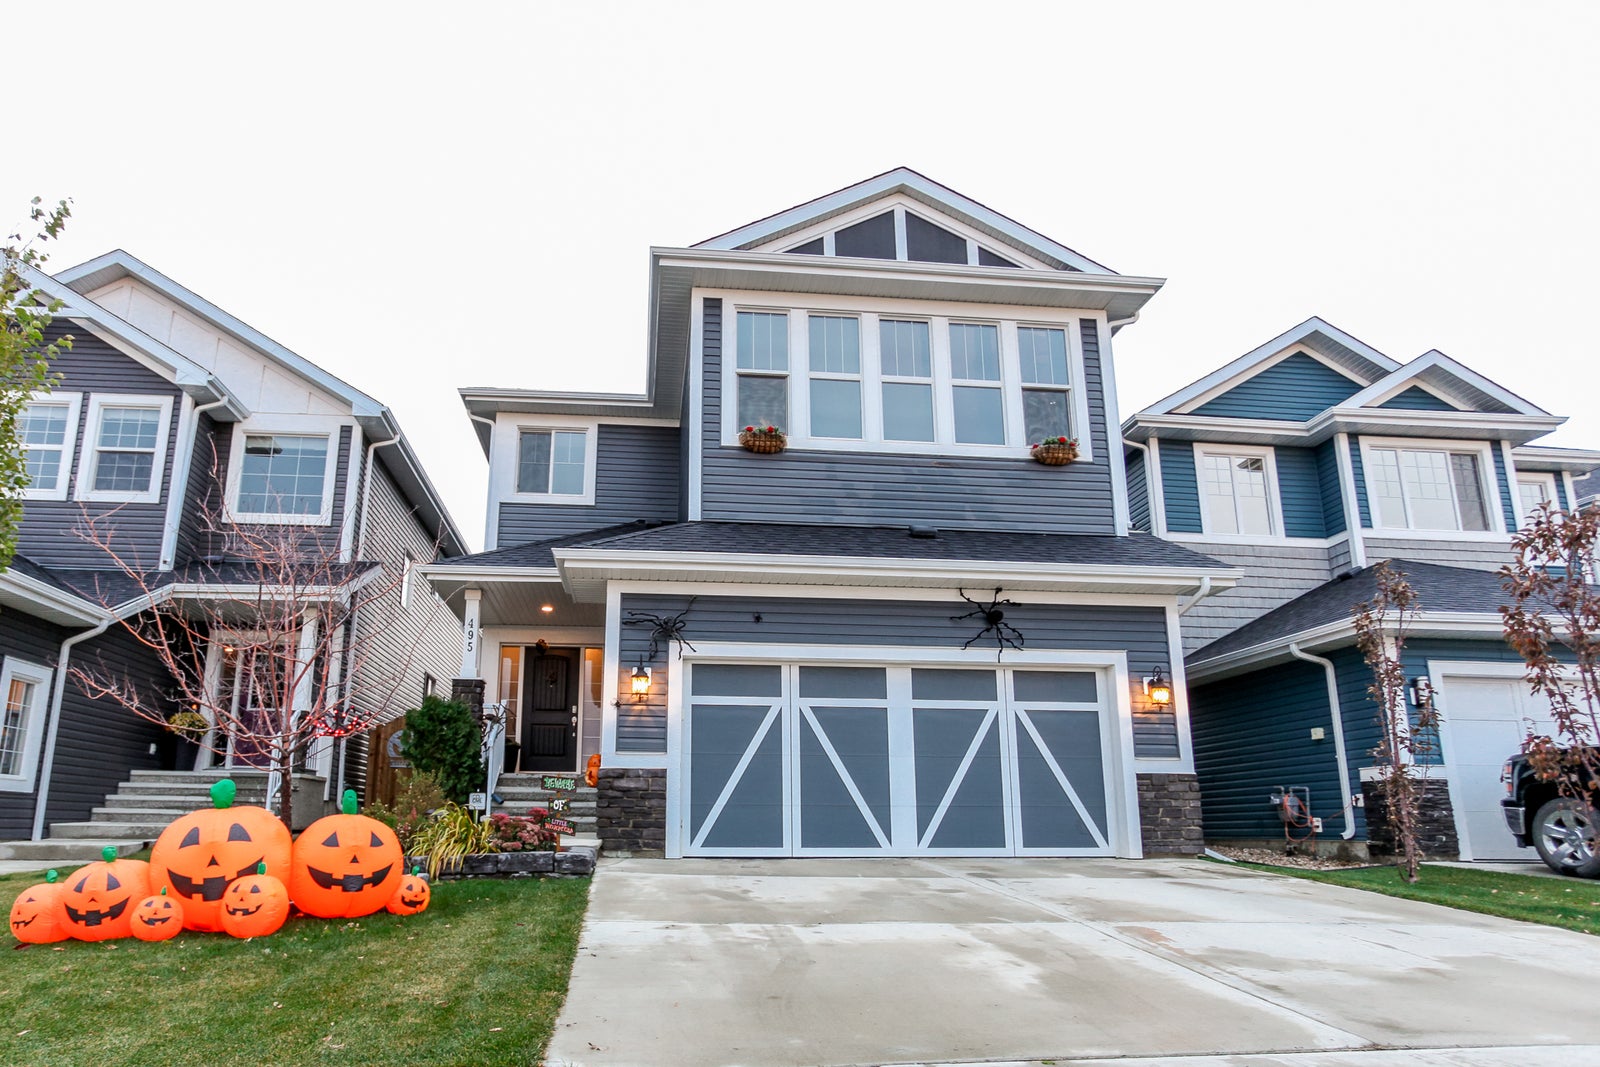 Sell your home in the fall